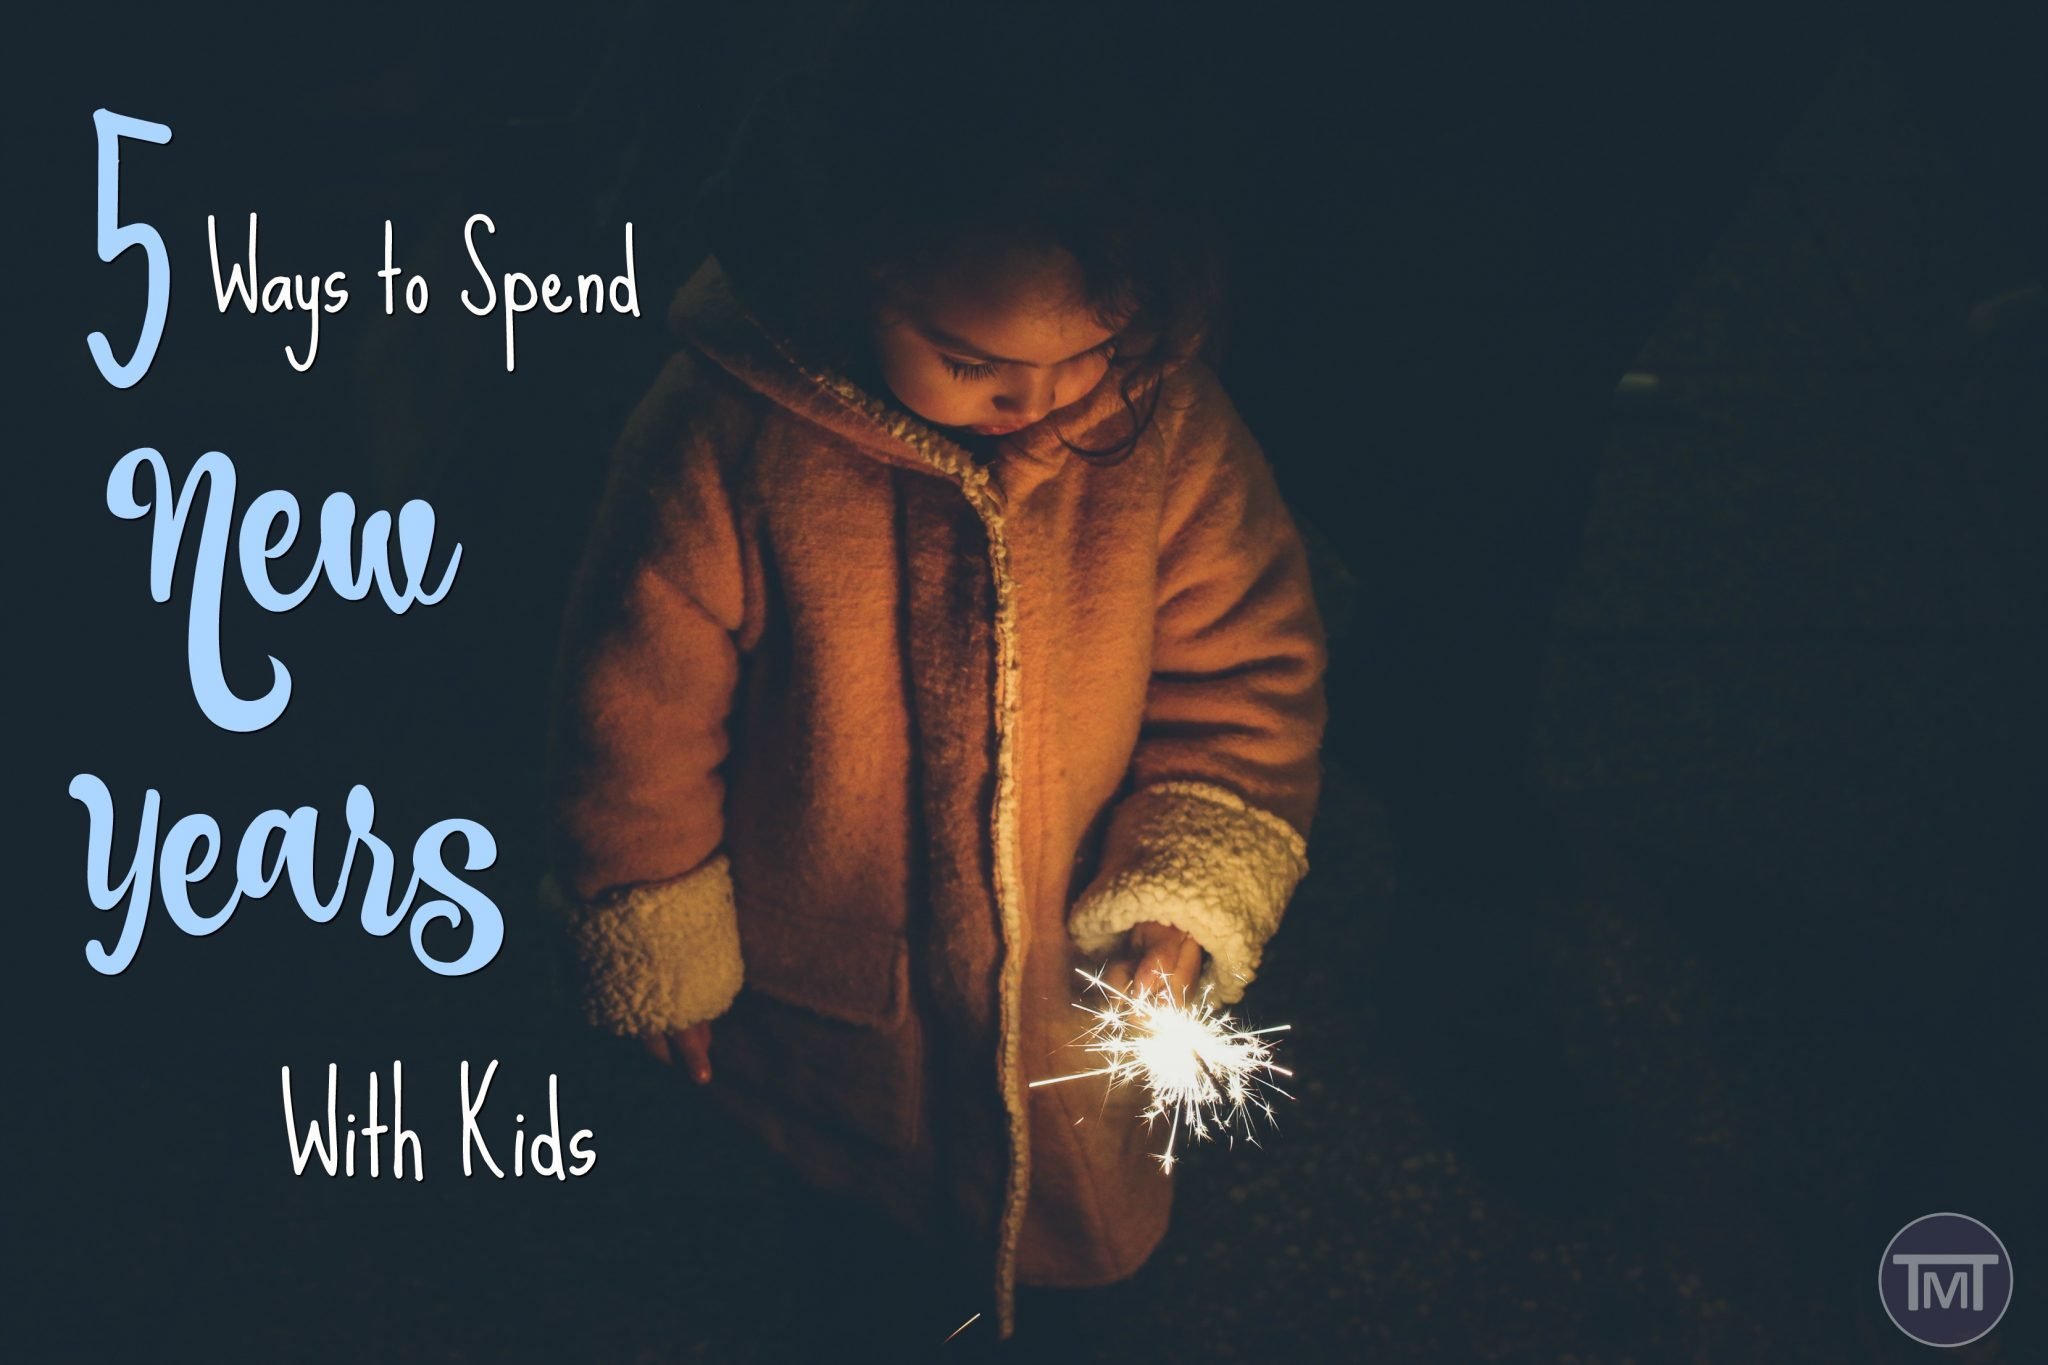 Celebrating new years with kids doesn't have to be boring or restrictive, here are 5 fun ways to incorporate the kids and have fun at new years.